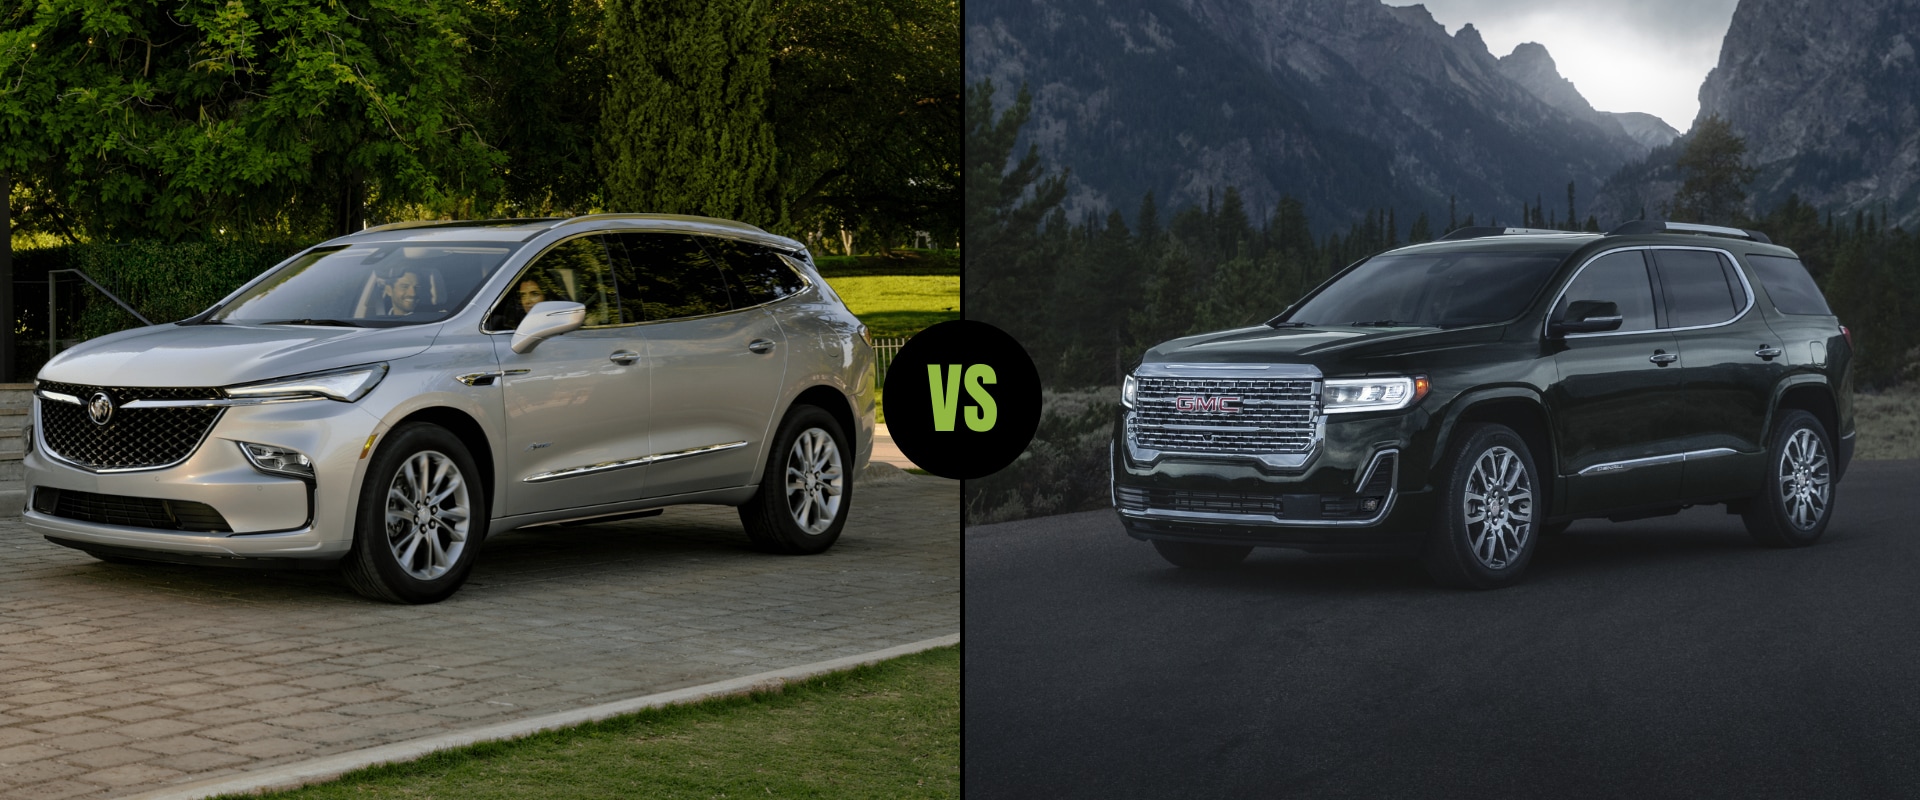 2022 GMC Acadia vs. 2022 Buick Enclave What’s the Difference? Octane